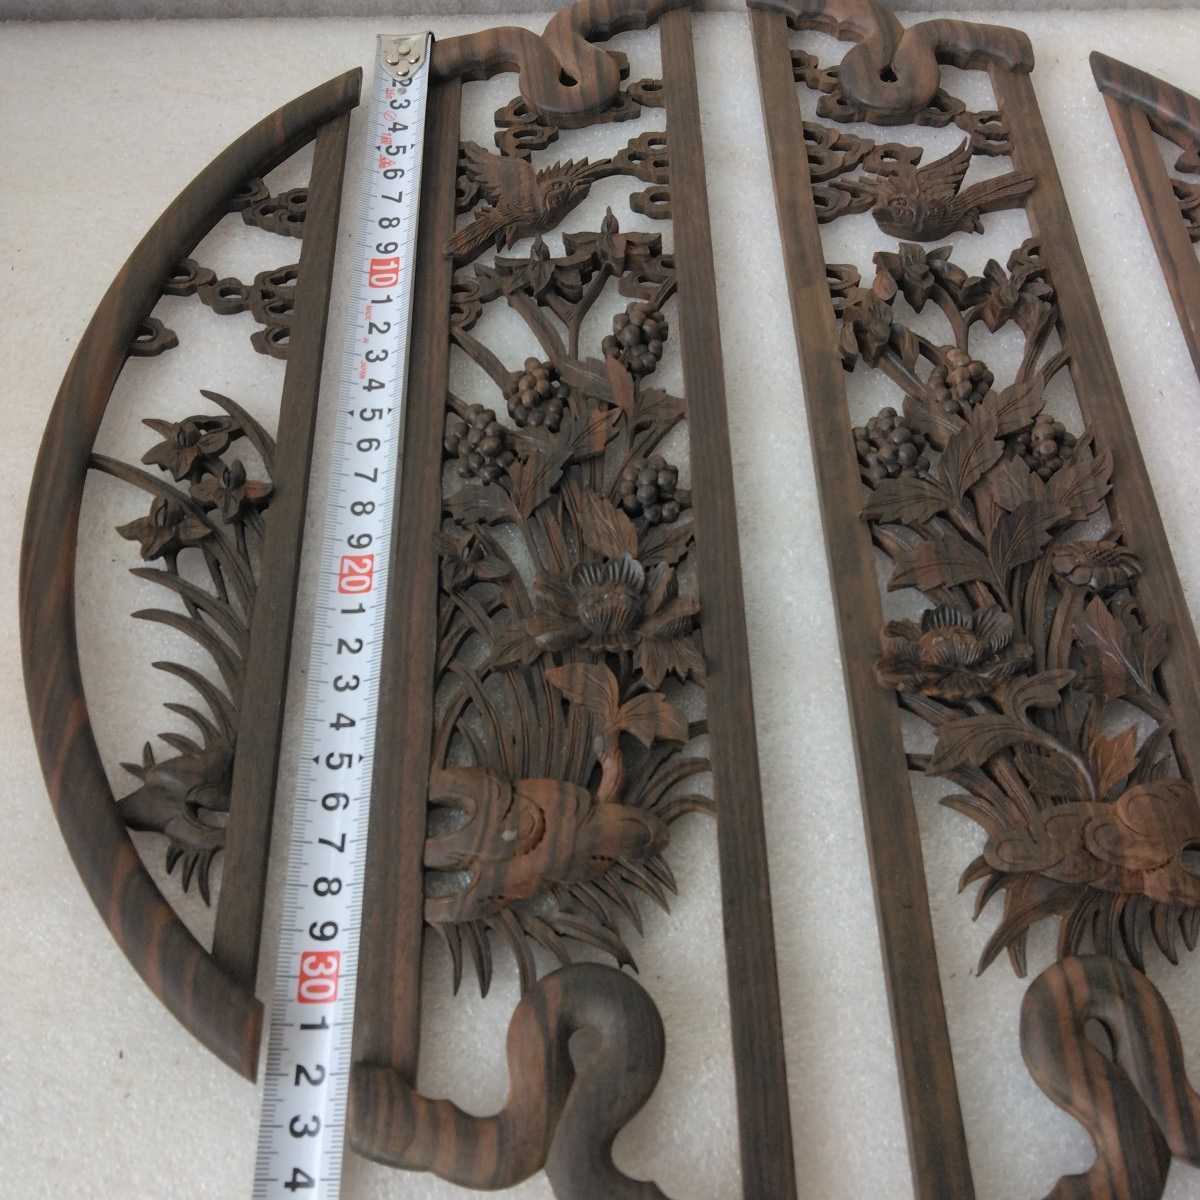 [ postage included ] ebony ... carving decoration board 4 pieces set control number (1234) dead stock wooden sculpture cloth finish 